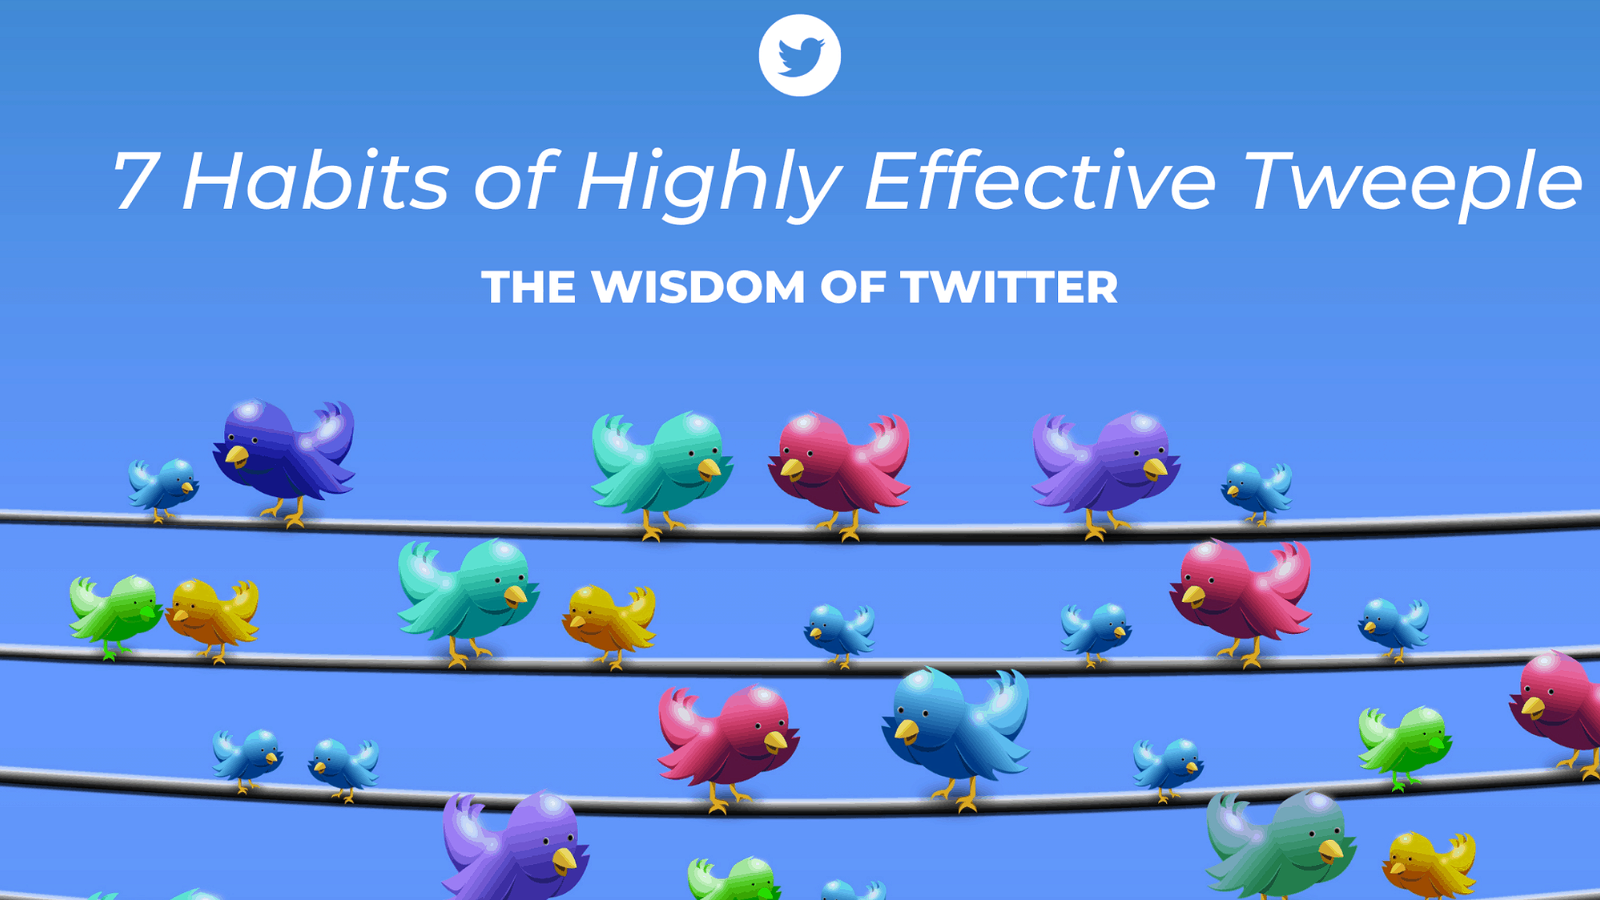 Why Twitter matters and how to make the best use of it?